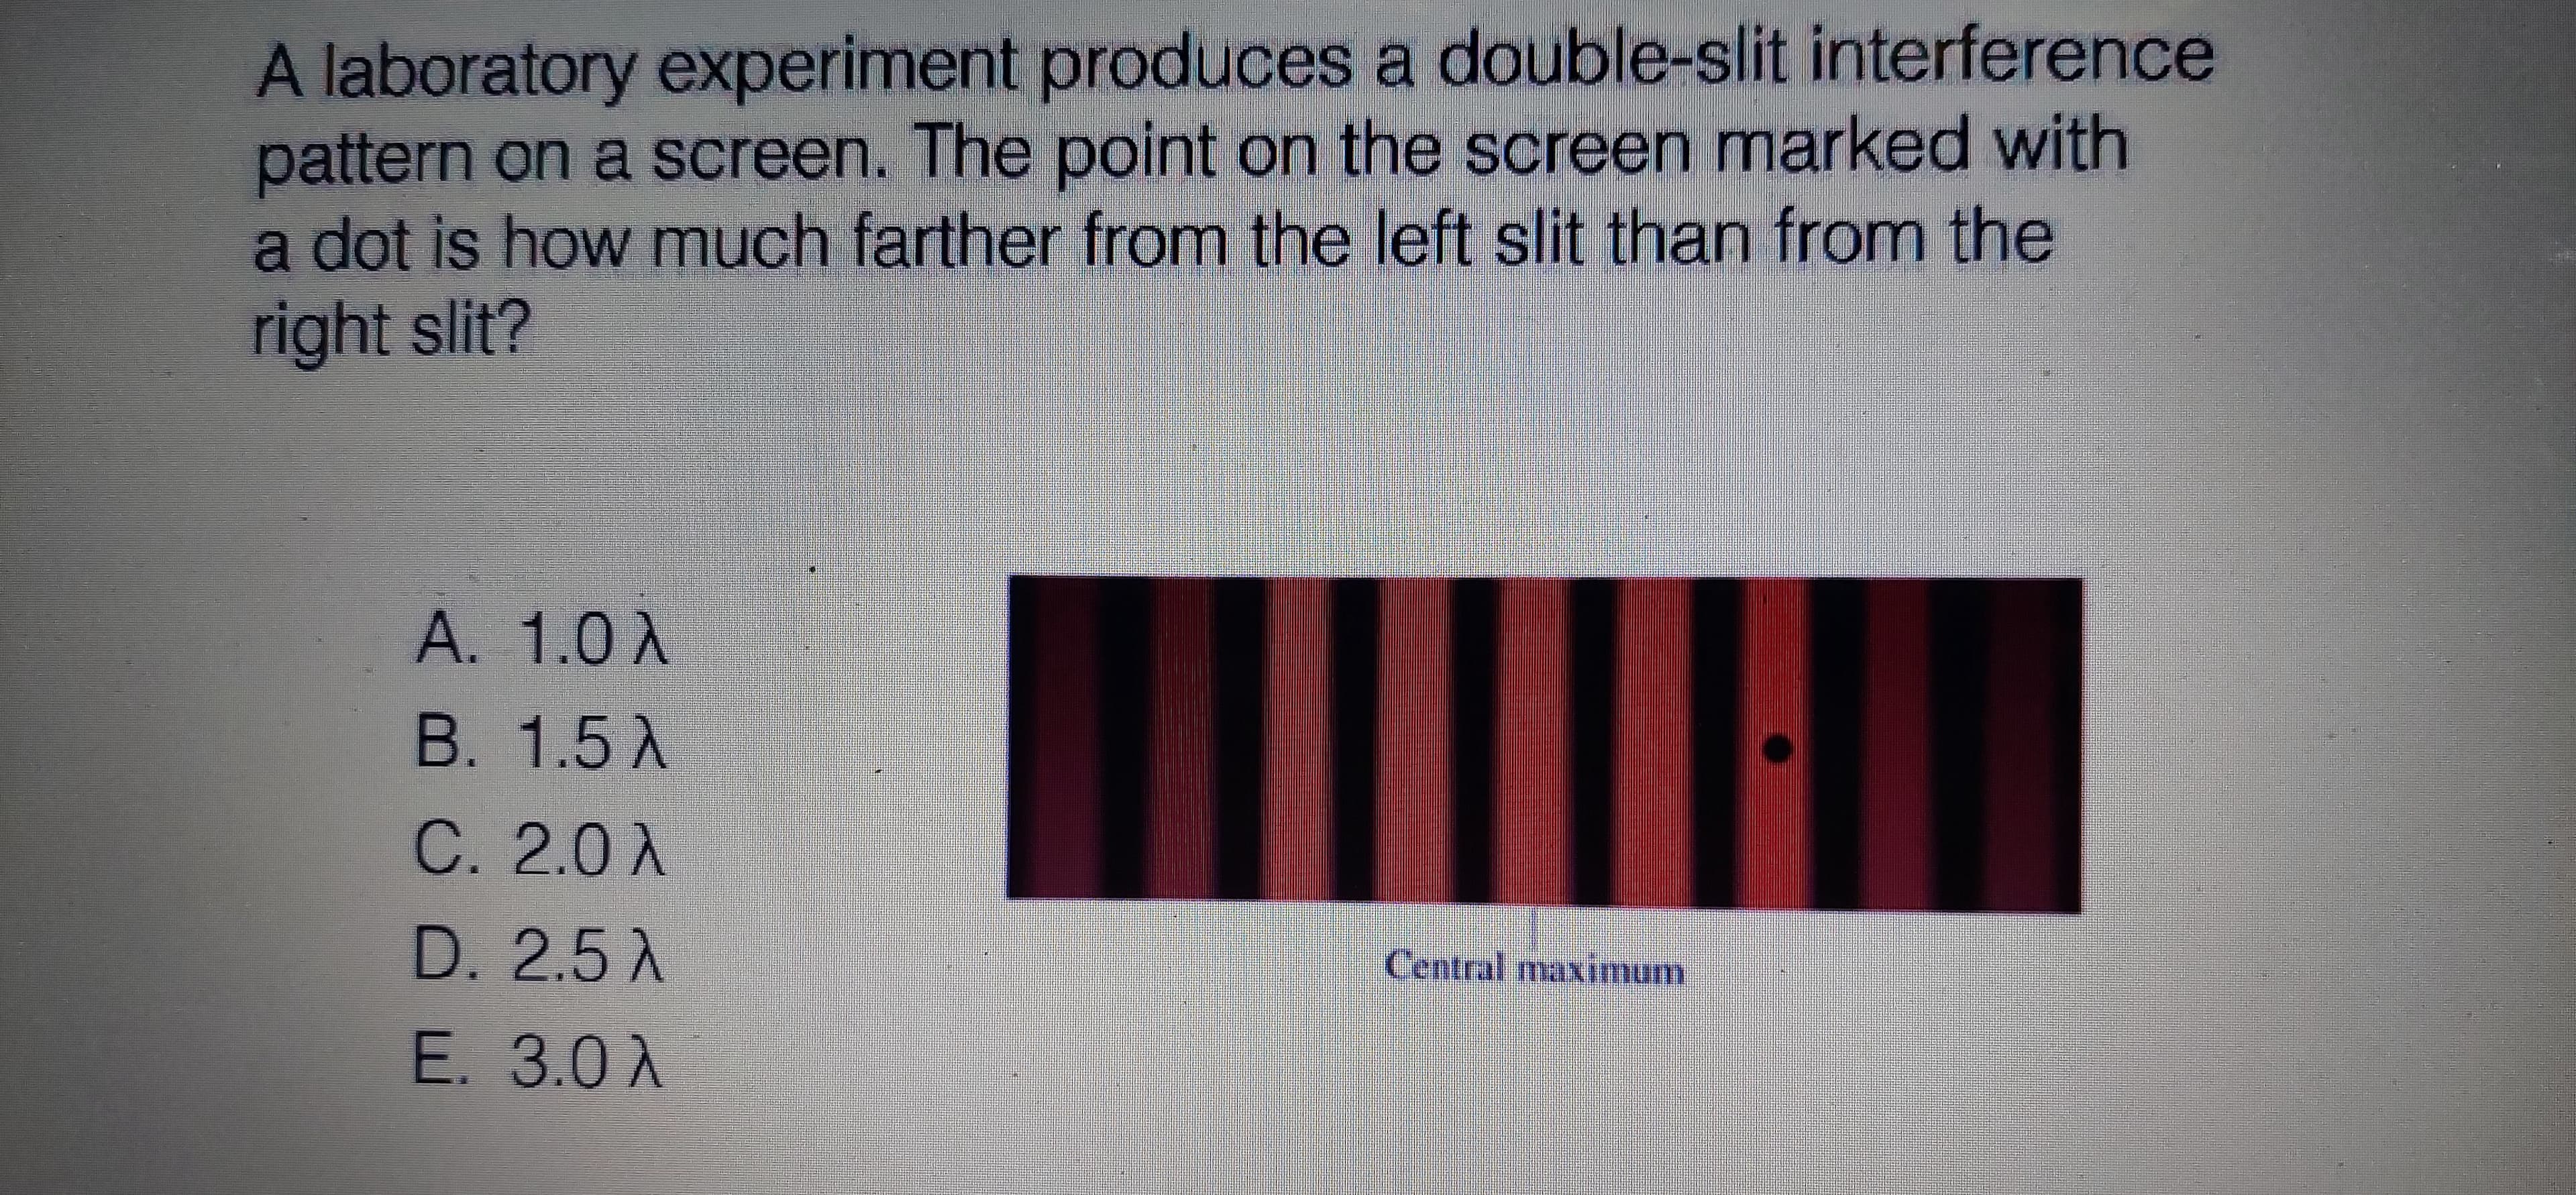 A laboratory experiment produces a double-slit interference
pattern on a screen. The point on the screen marked with
a dot is how much farther from the left slit than from the
right slit?
A. 1.0X
B. 1.5 A
C. 2.0 A
D. 2.5 A
E. 3.0 A
Central maximum